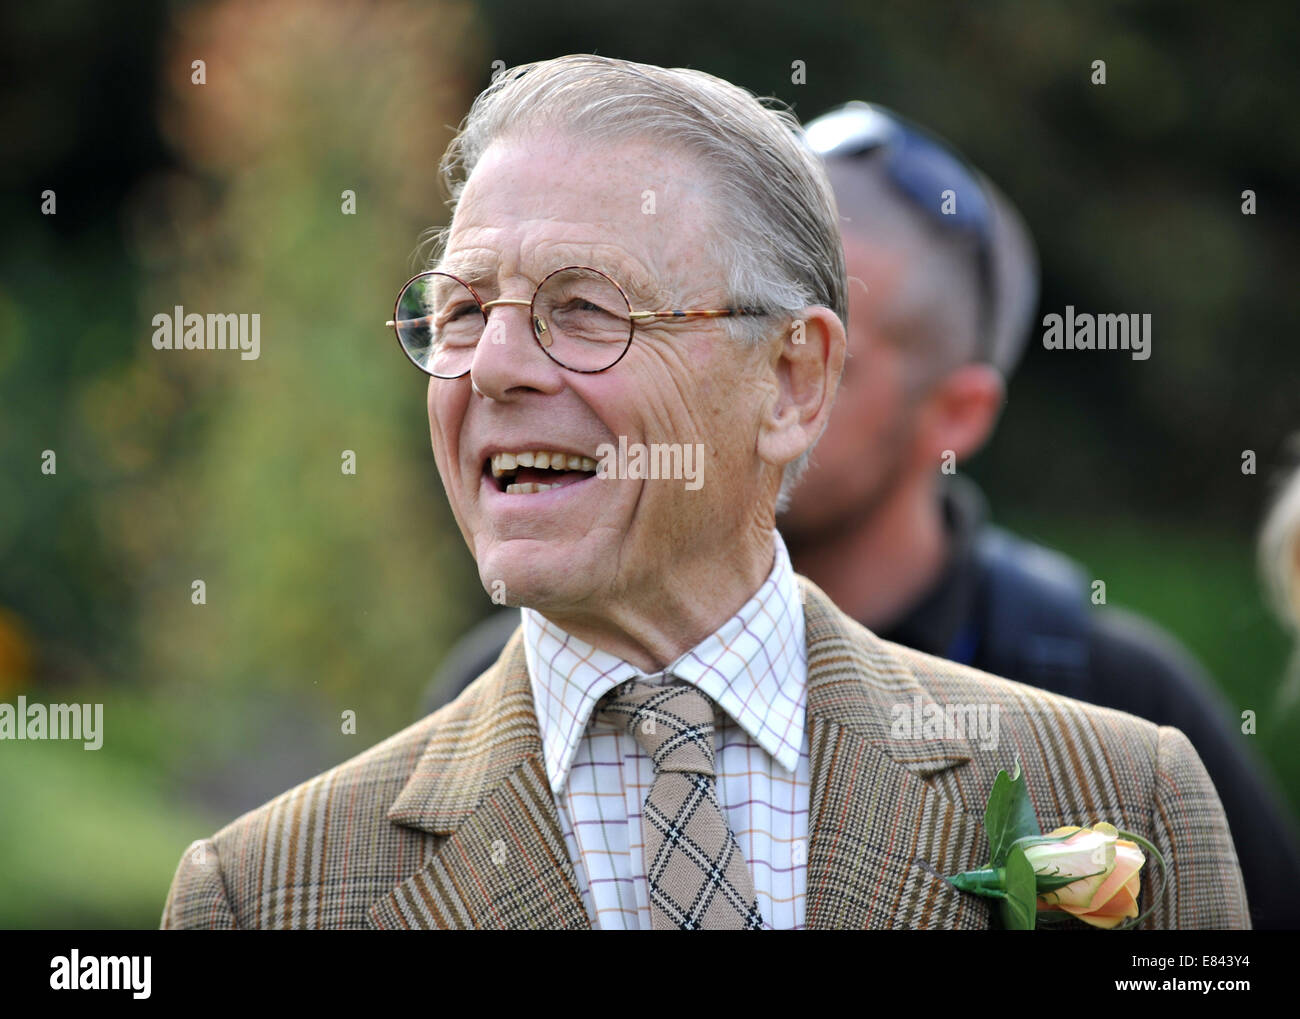 Dorset, UK. 29th Sep, 2014. Actor Edward Fox was joined by his wife and fellow actress Joanna David as they opened a set of new greenhouses at the Kingston Maurward Horticultural College in their home county of Dorset, Britain. Credit:  Dorset Media Service/Alamy Live News Stock Photo